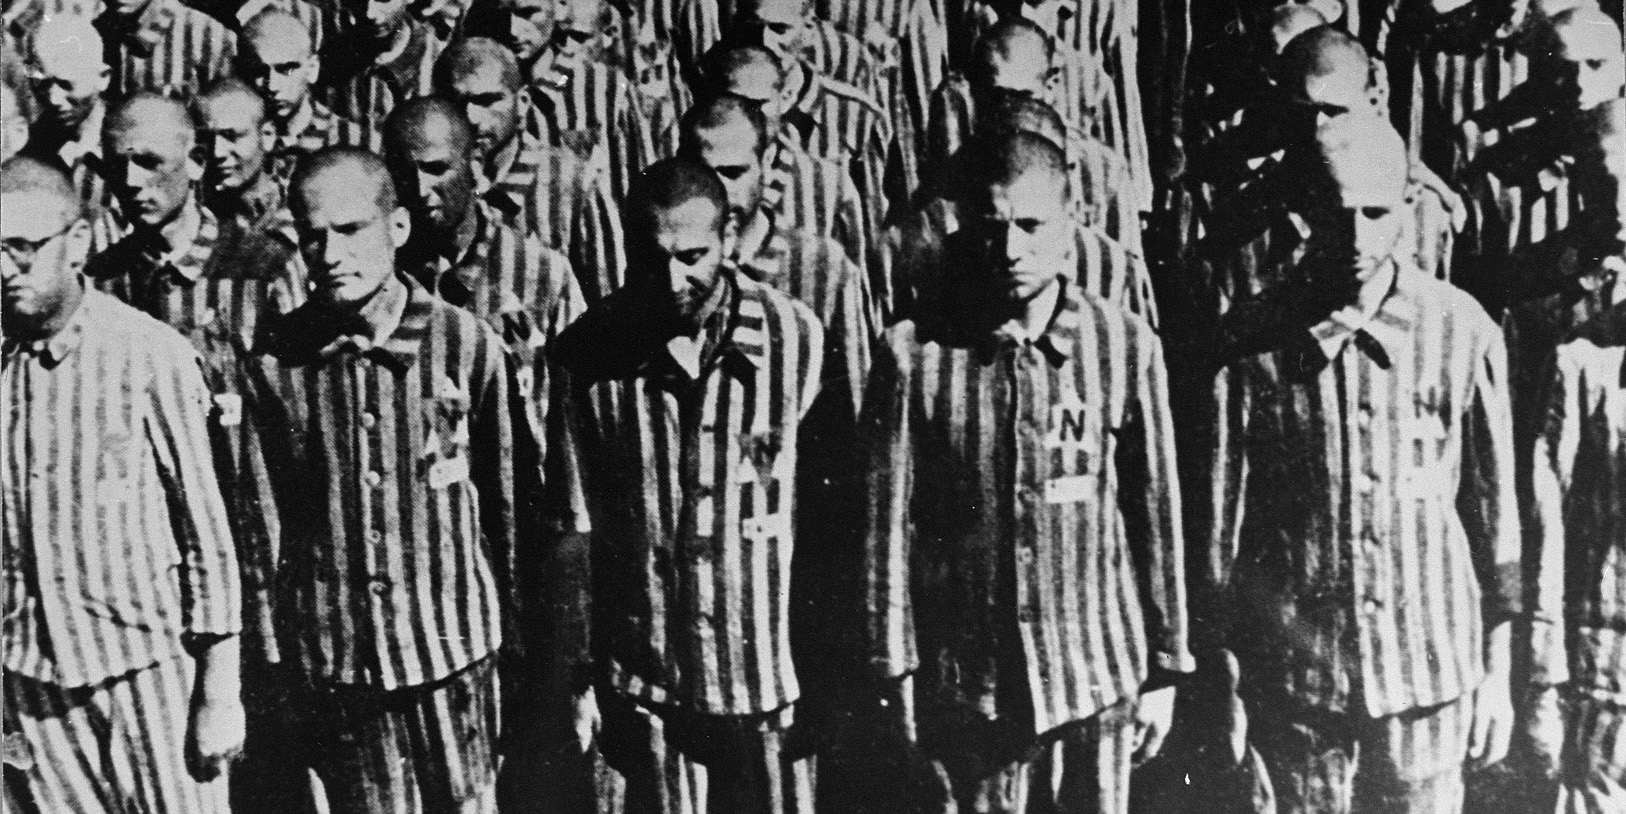 I Felt Detached About My Family's Holocaust Story Until...